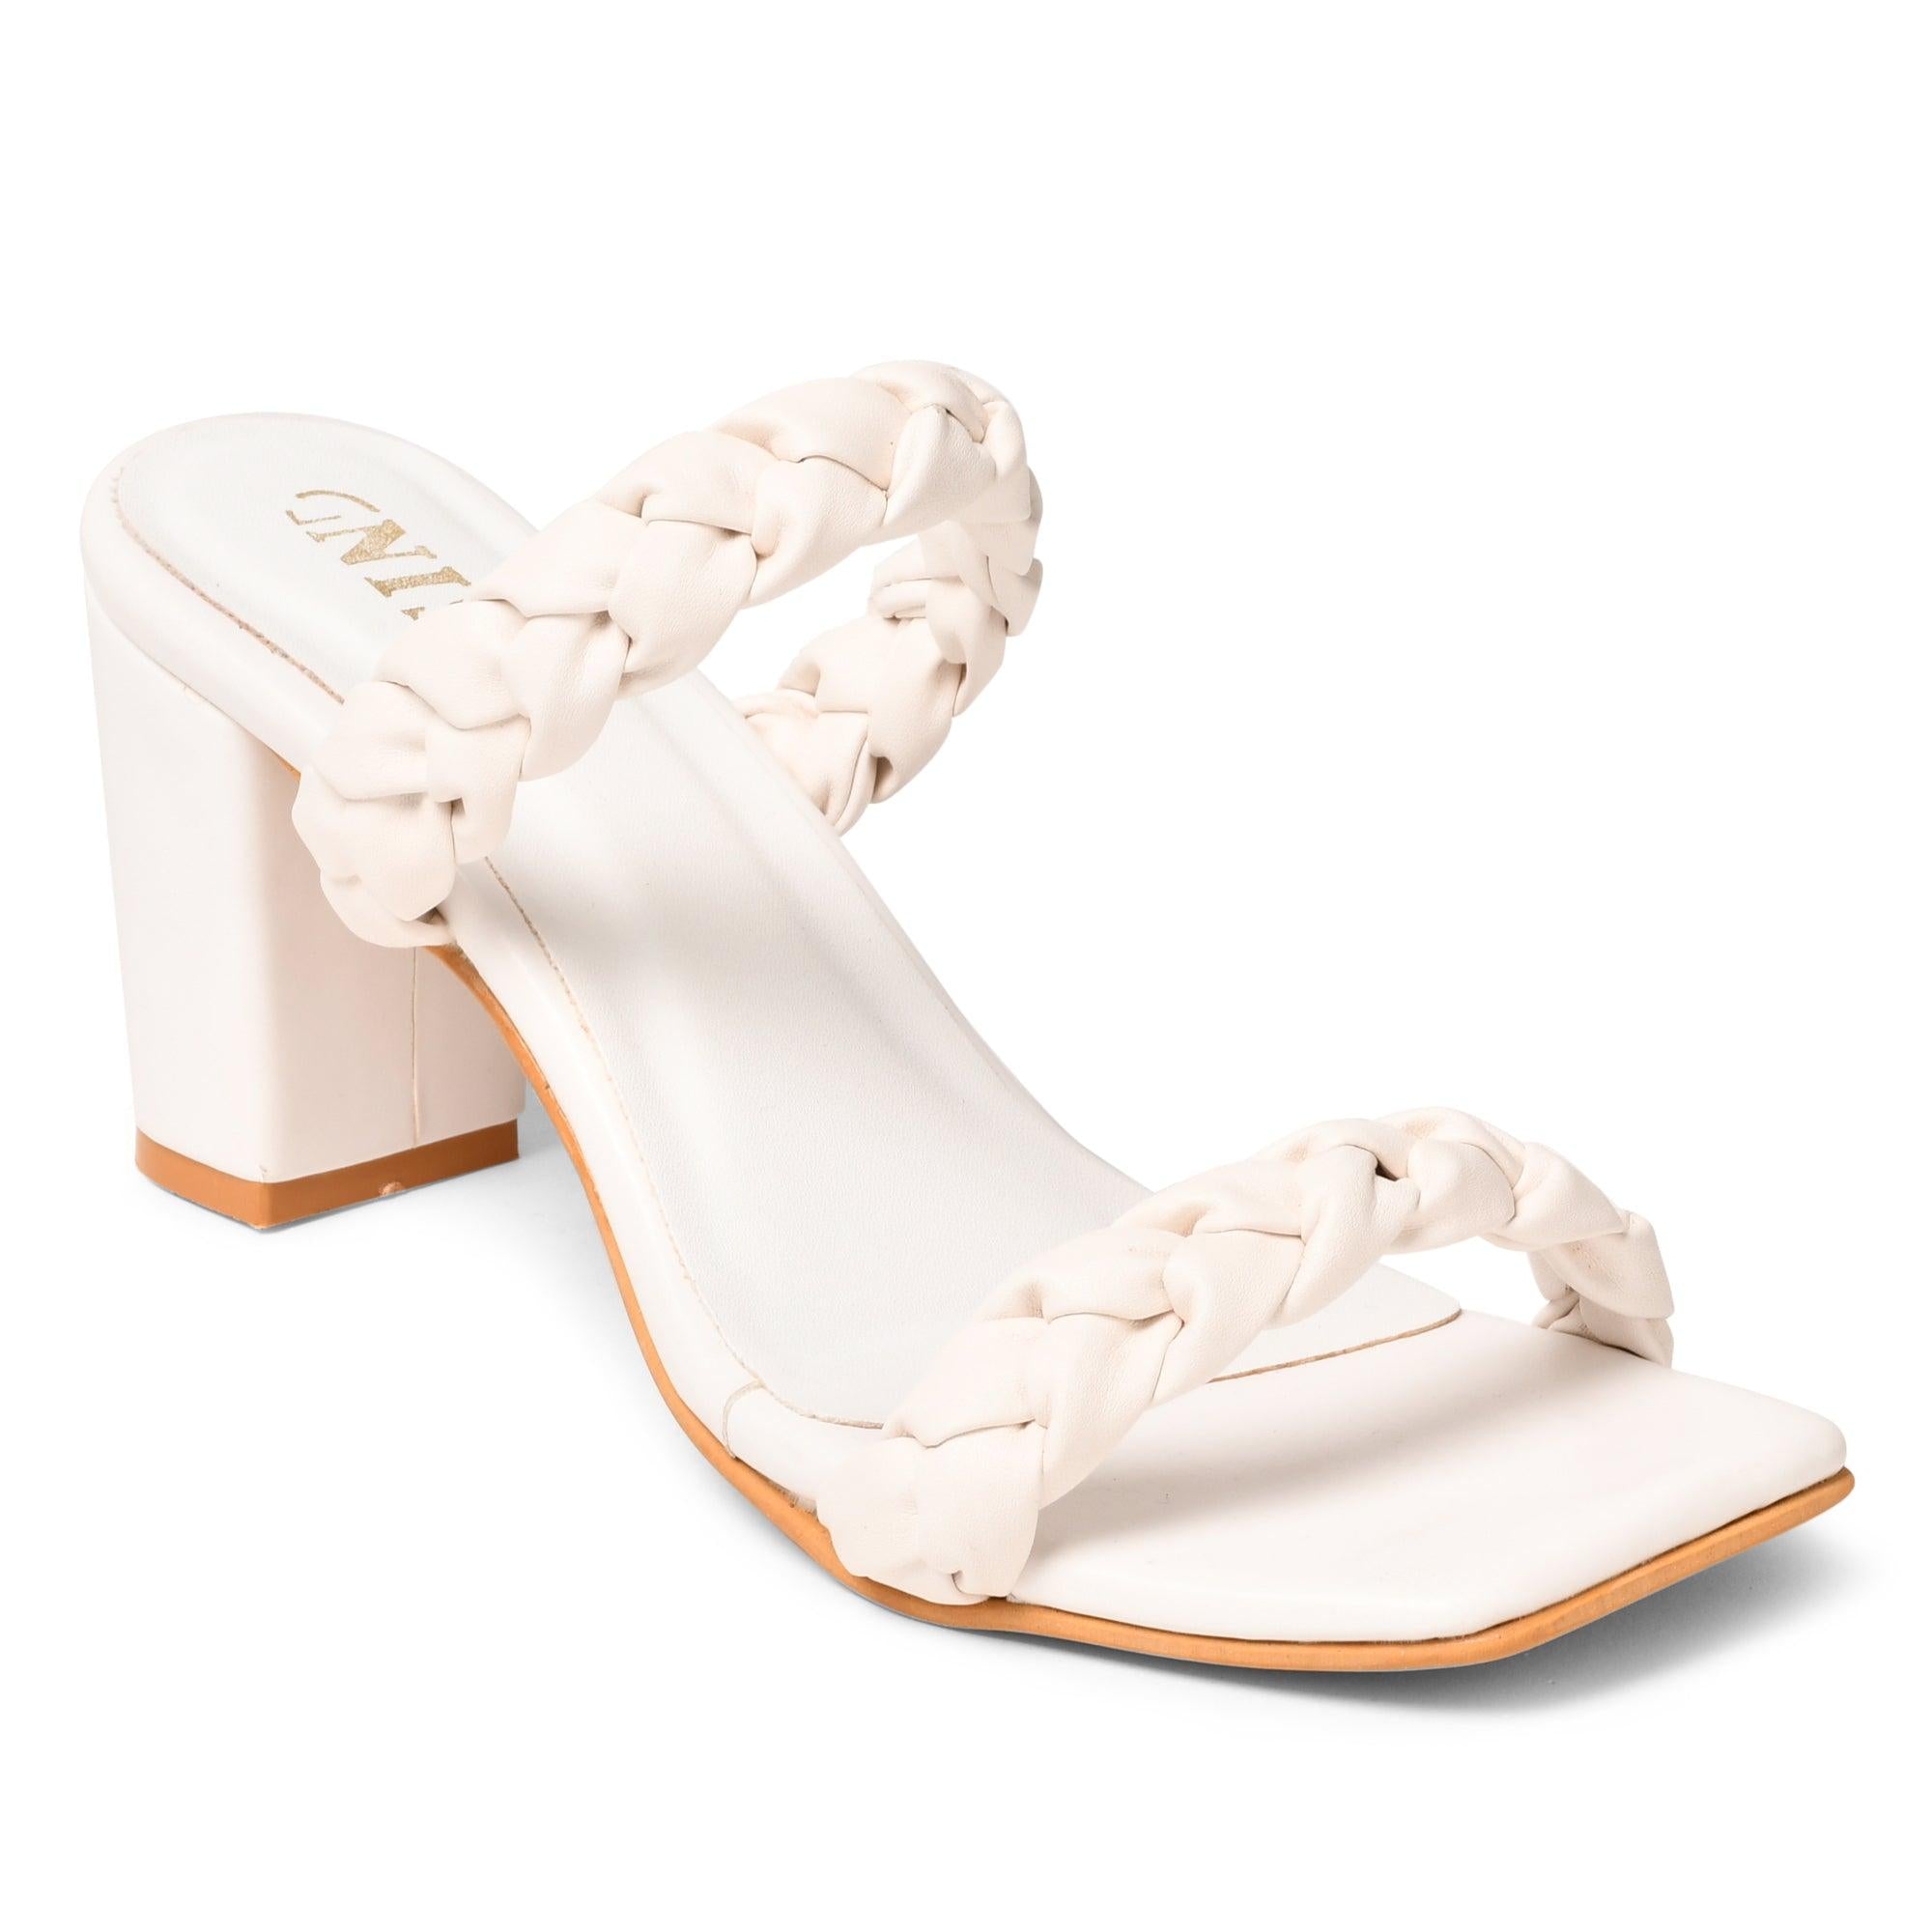 Buy GNIST Women's Gladiator Strapy Chunky Heels - White at Amazon.in